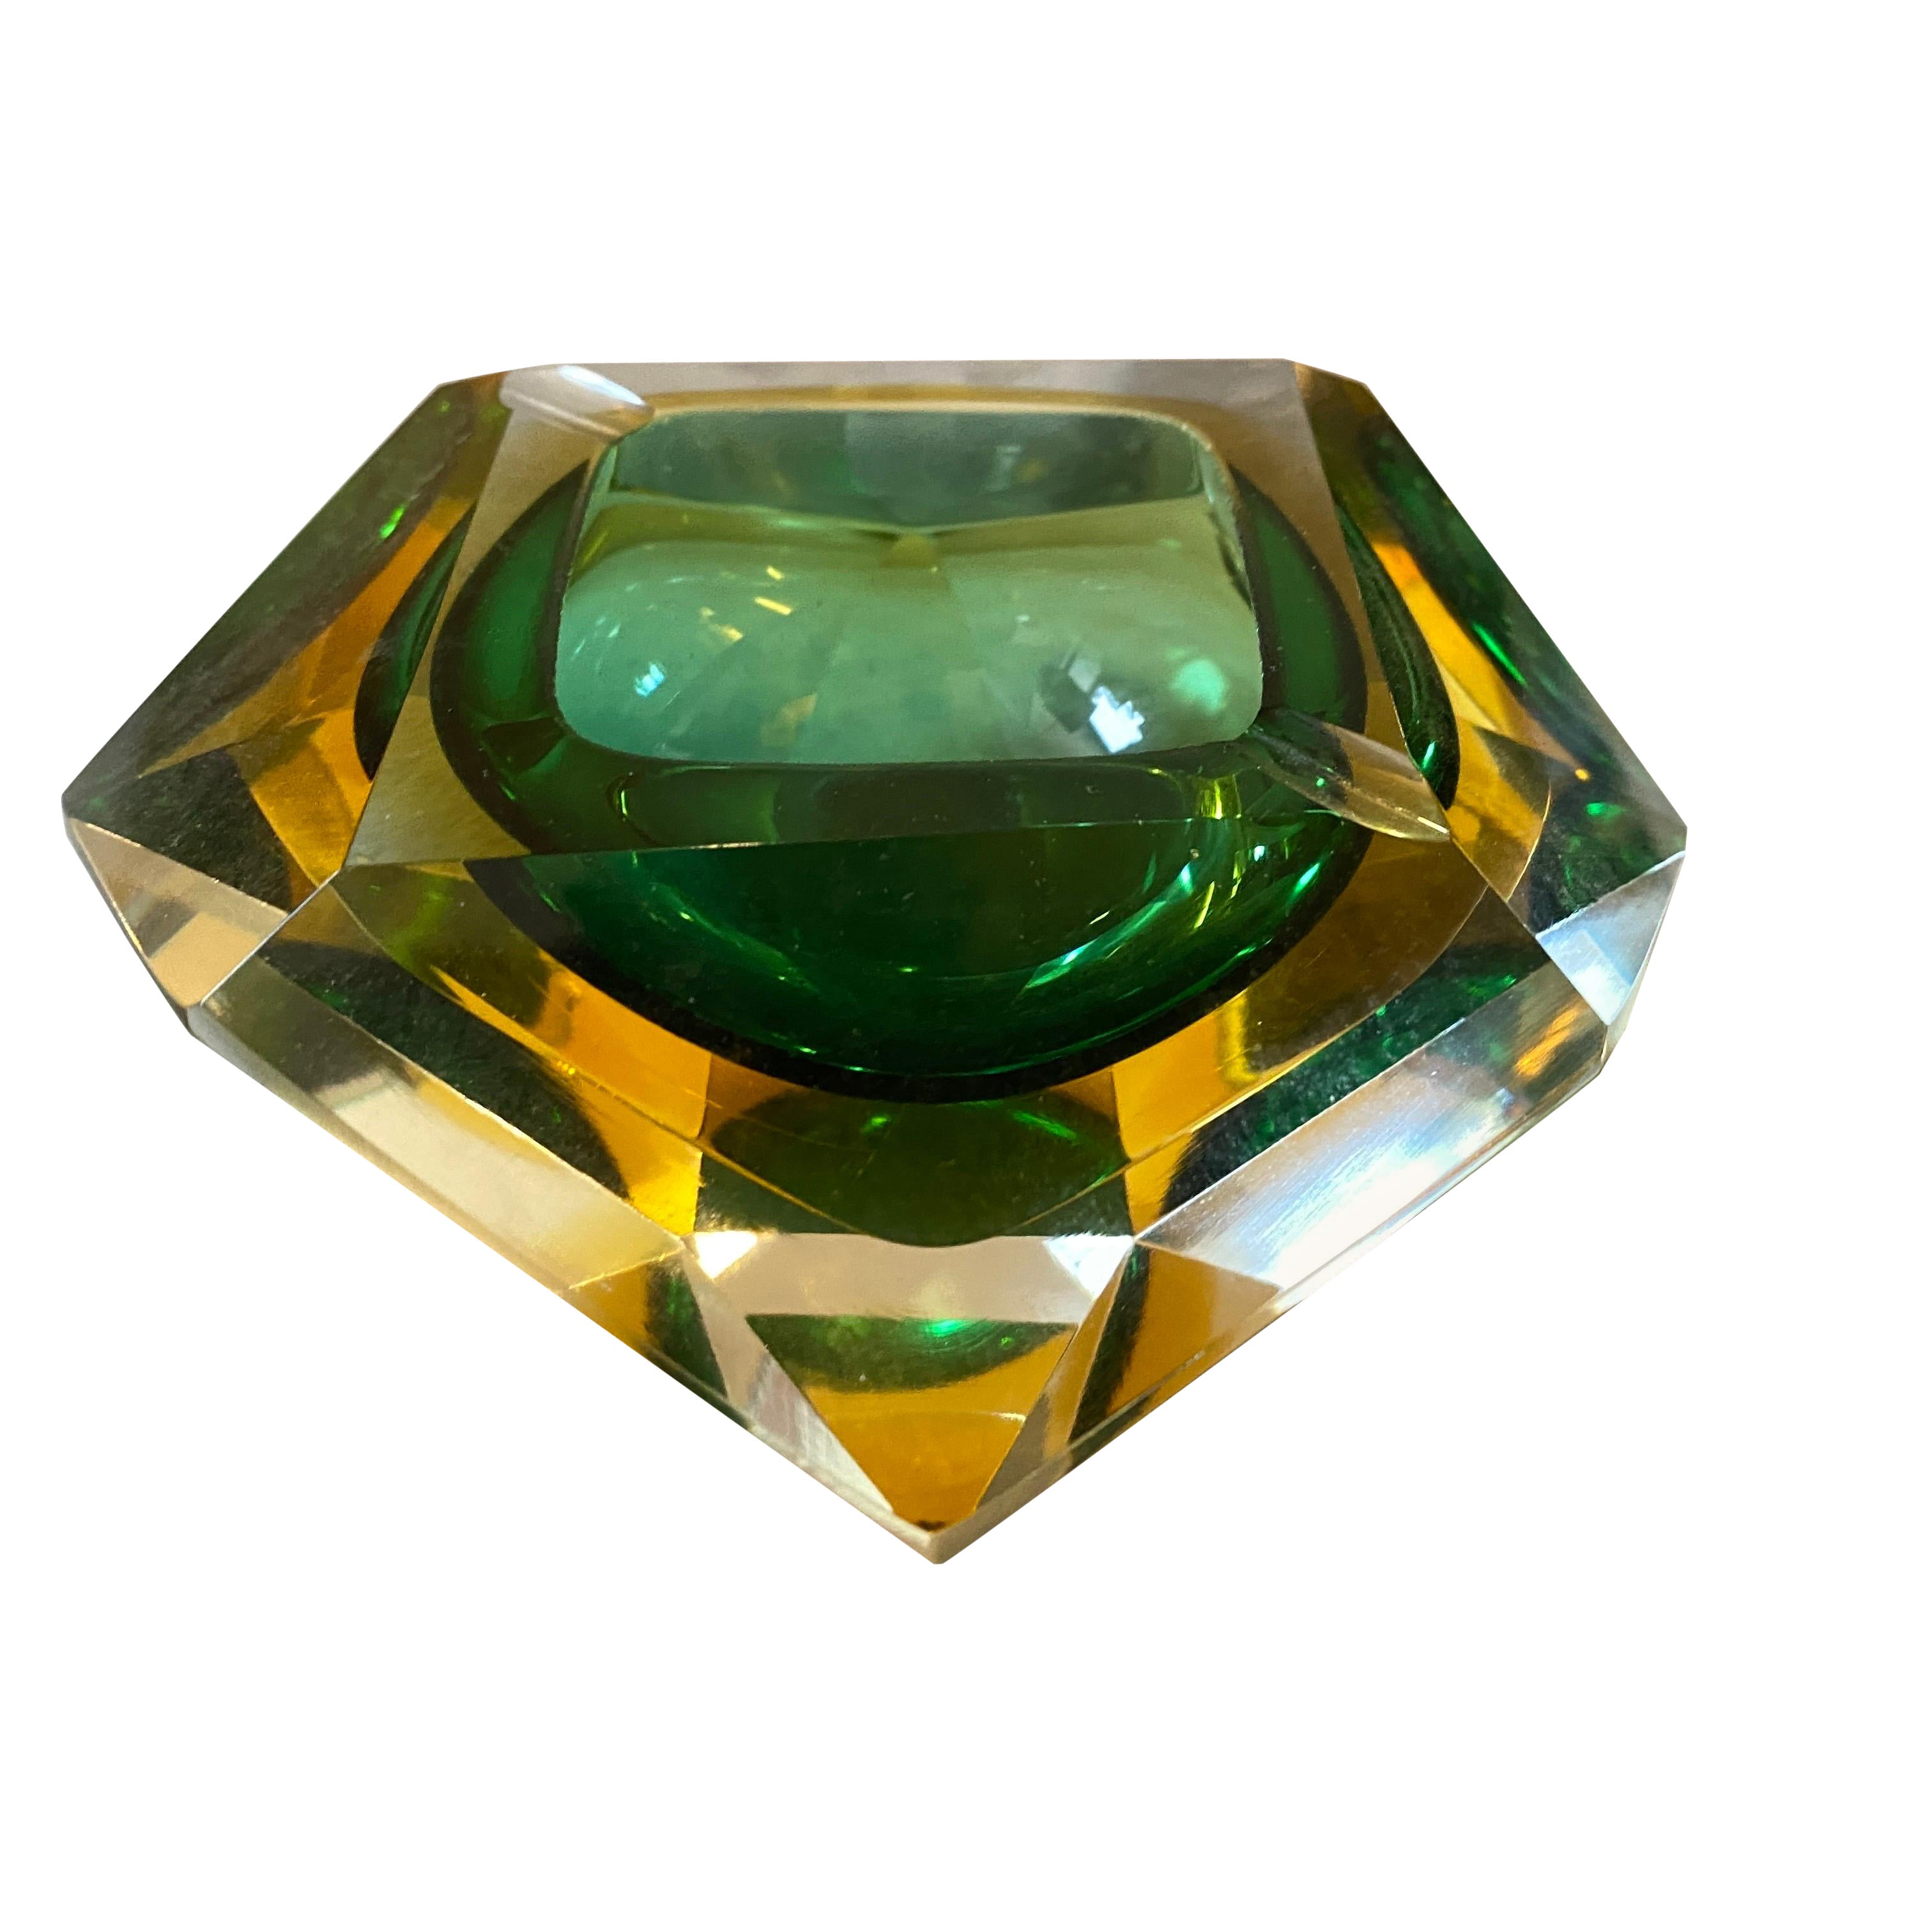 1970s Modernist Faceted Yellow and Green Sommerso Murano Glass Ashtray by Seguso